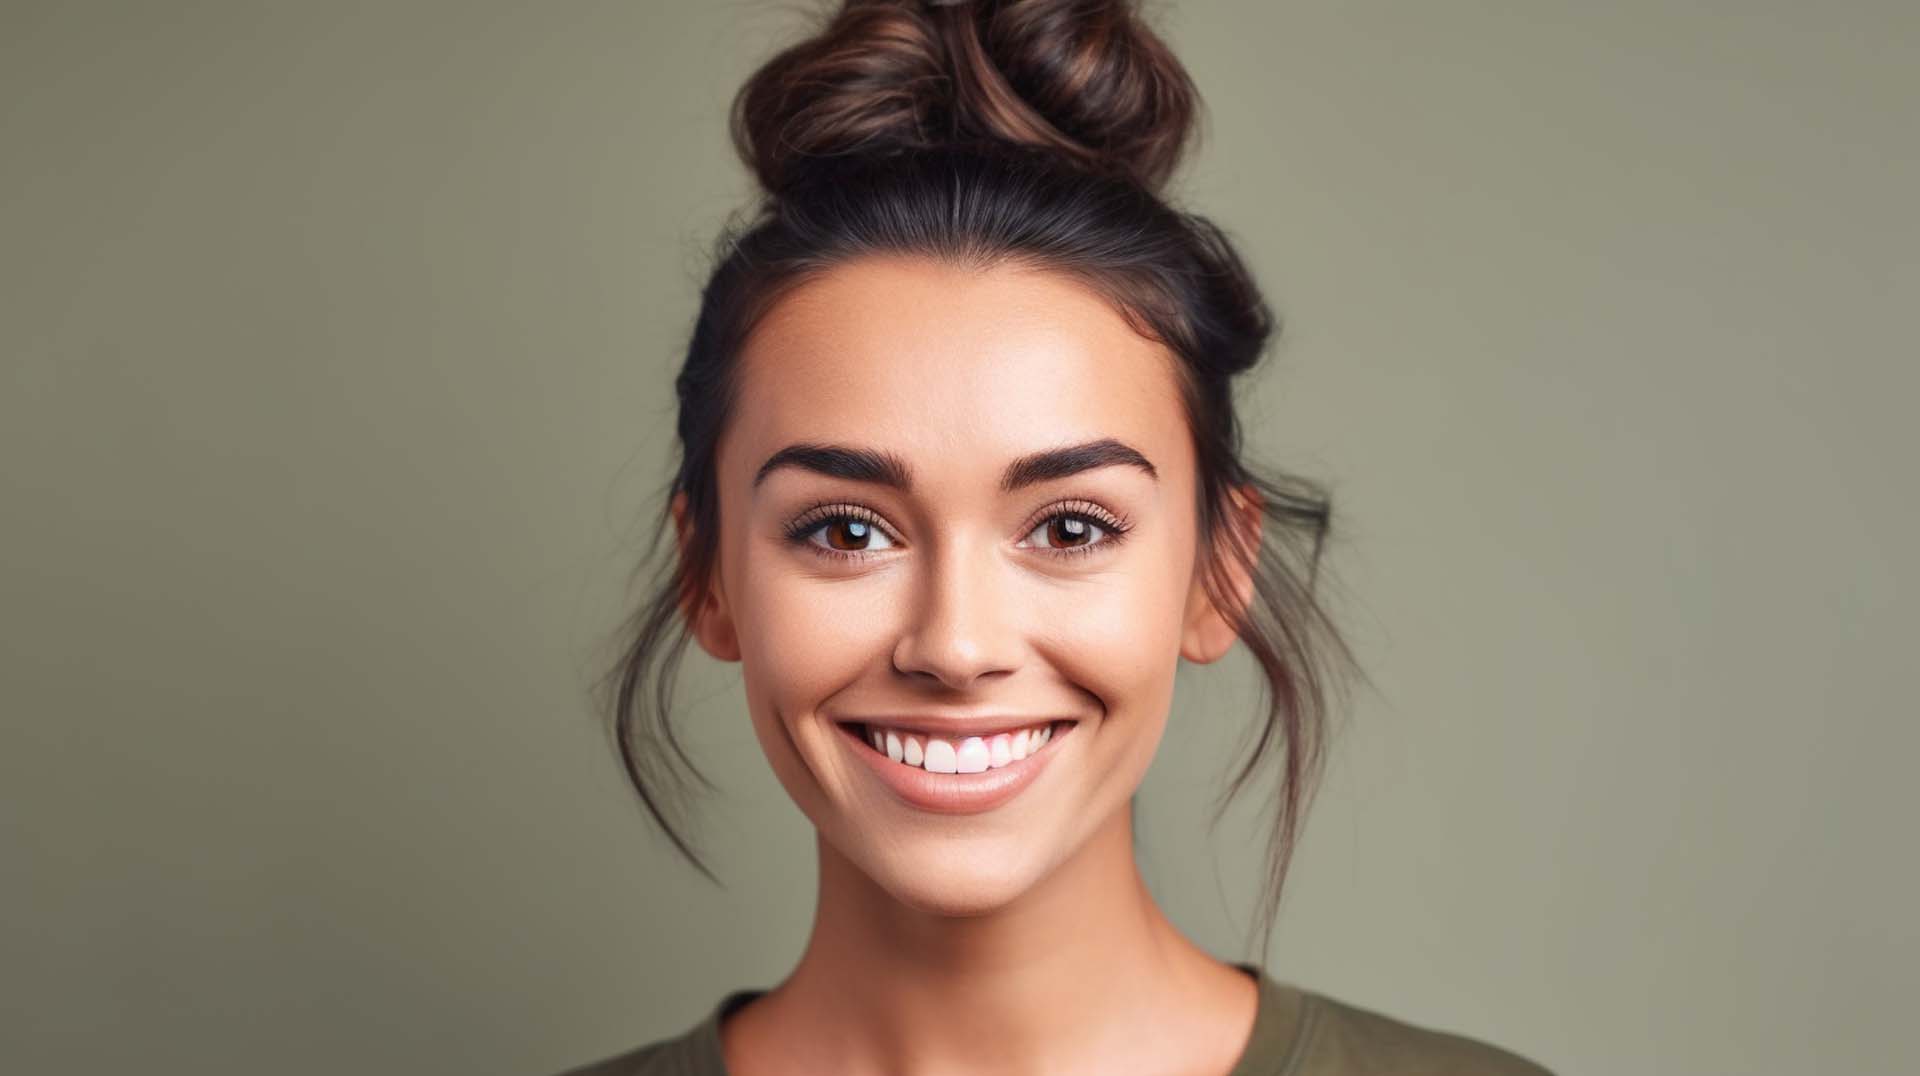 If you're considering a forehead lift in Kitchener, you should be prepared for the surgery and know what to expect.